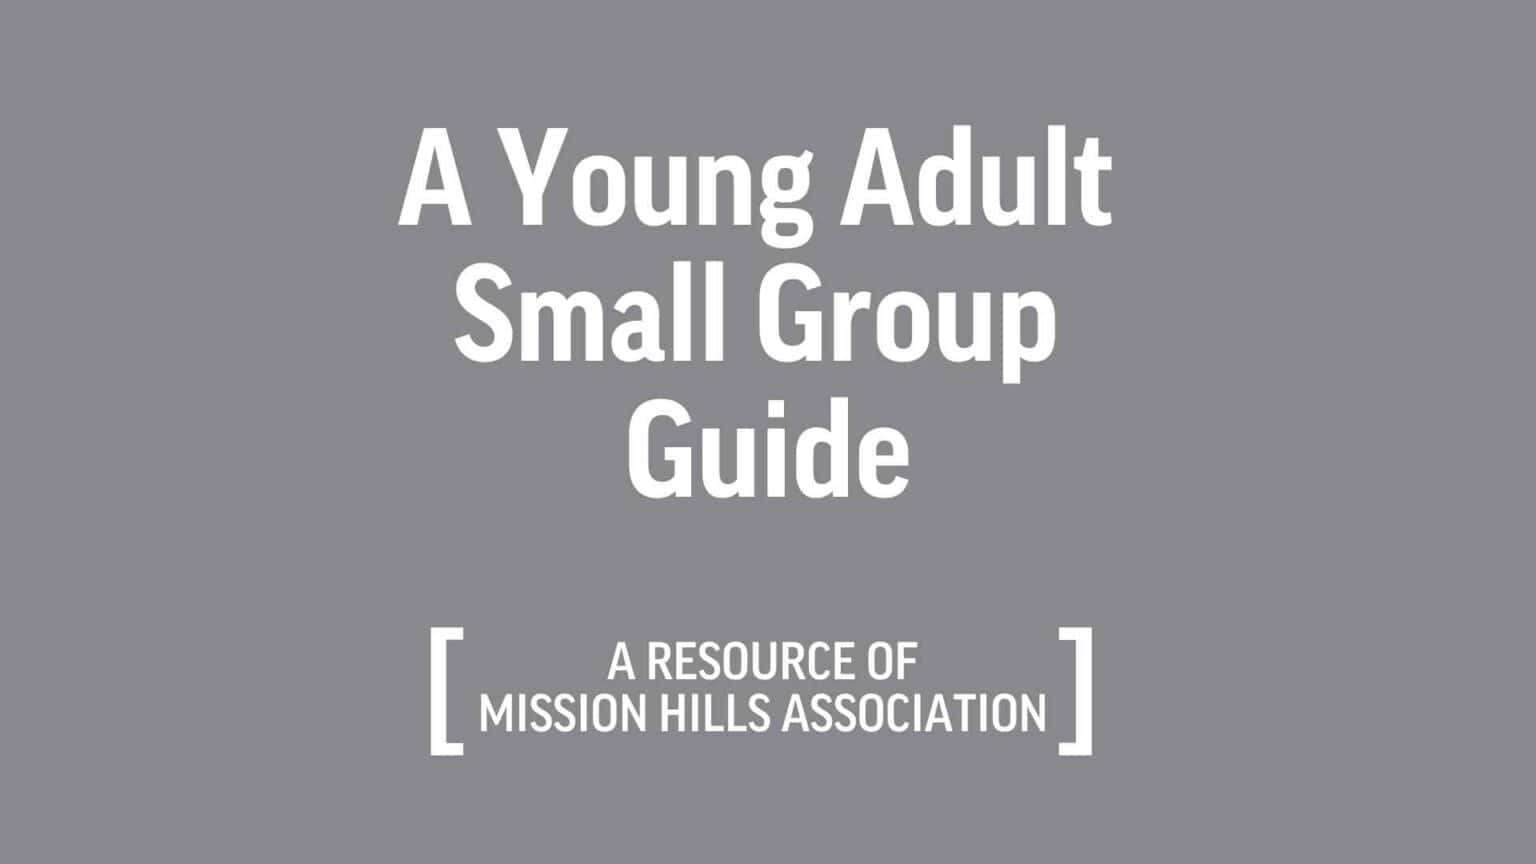 A Young Adult Small Group Guide